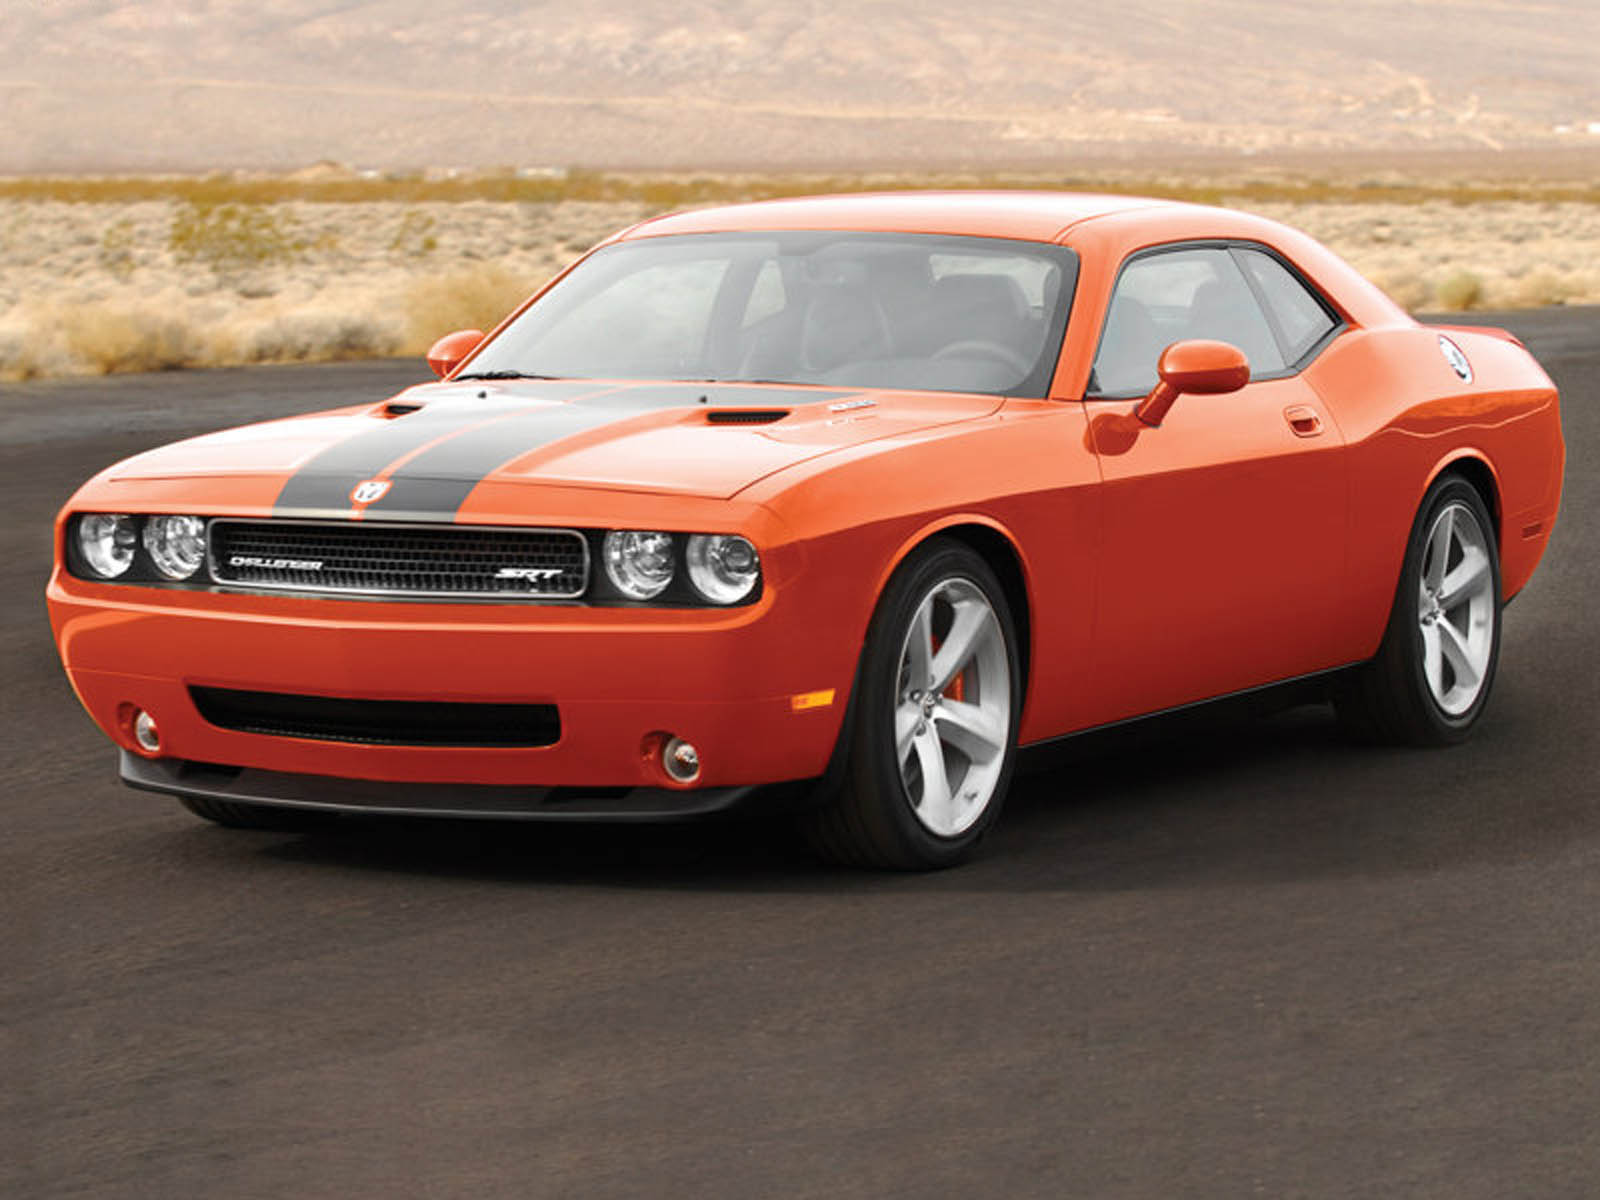 Srt8 Car Wallpaper Image Photos Pictures And Background For